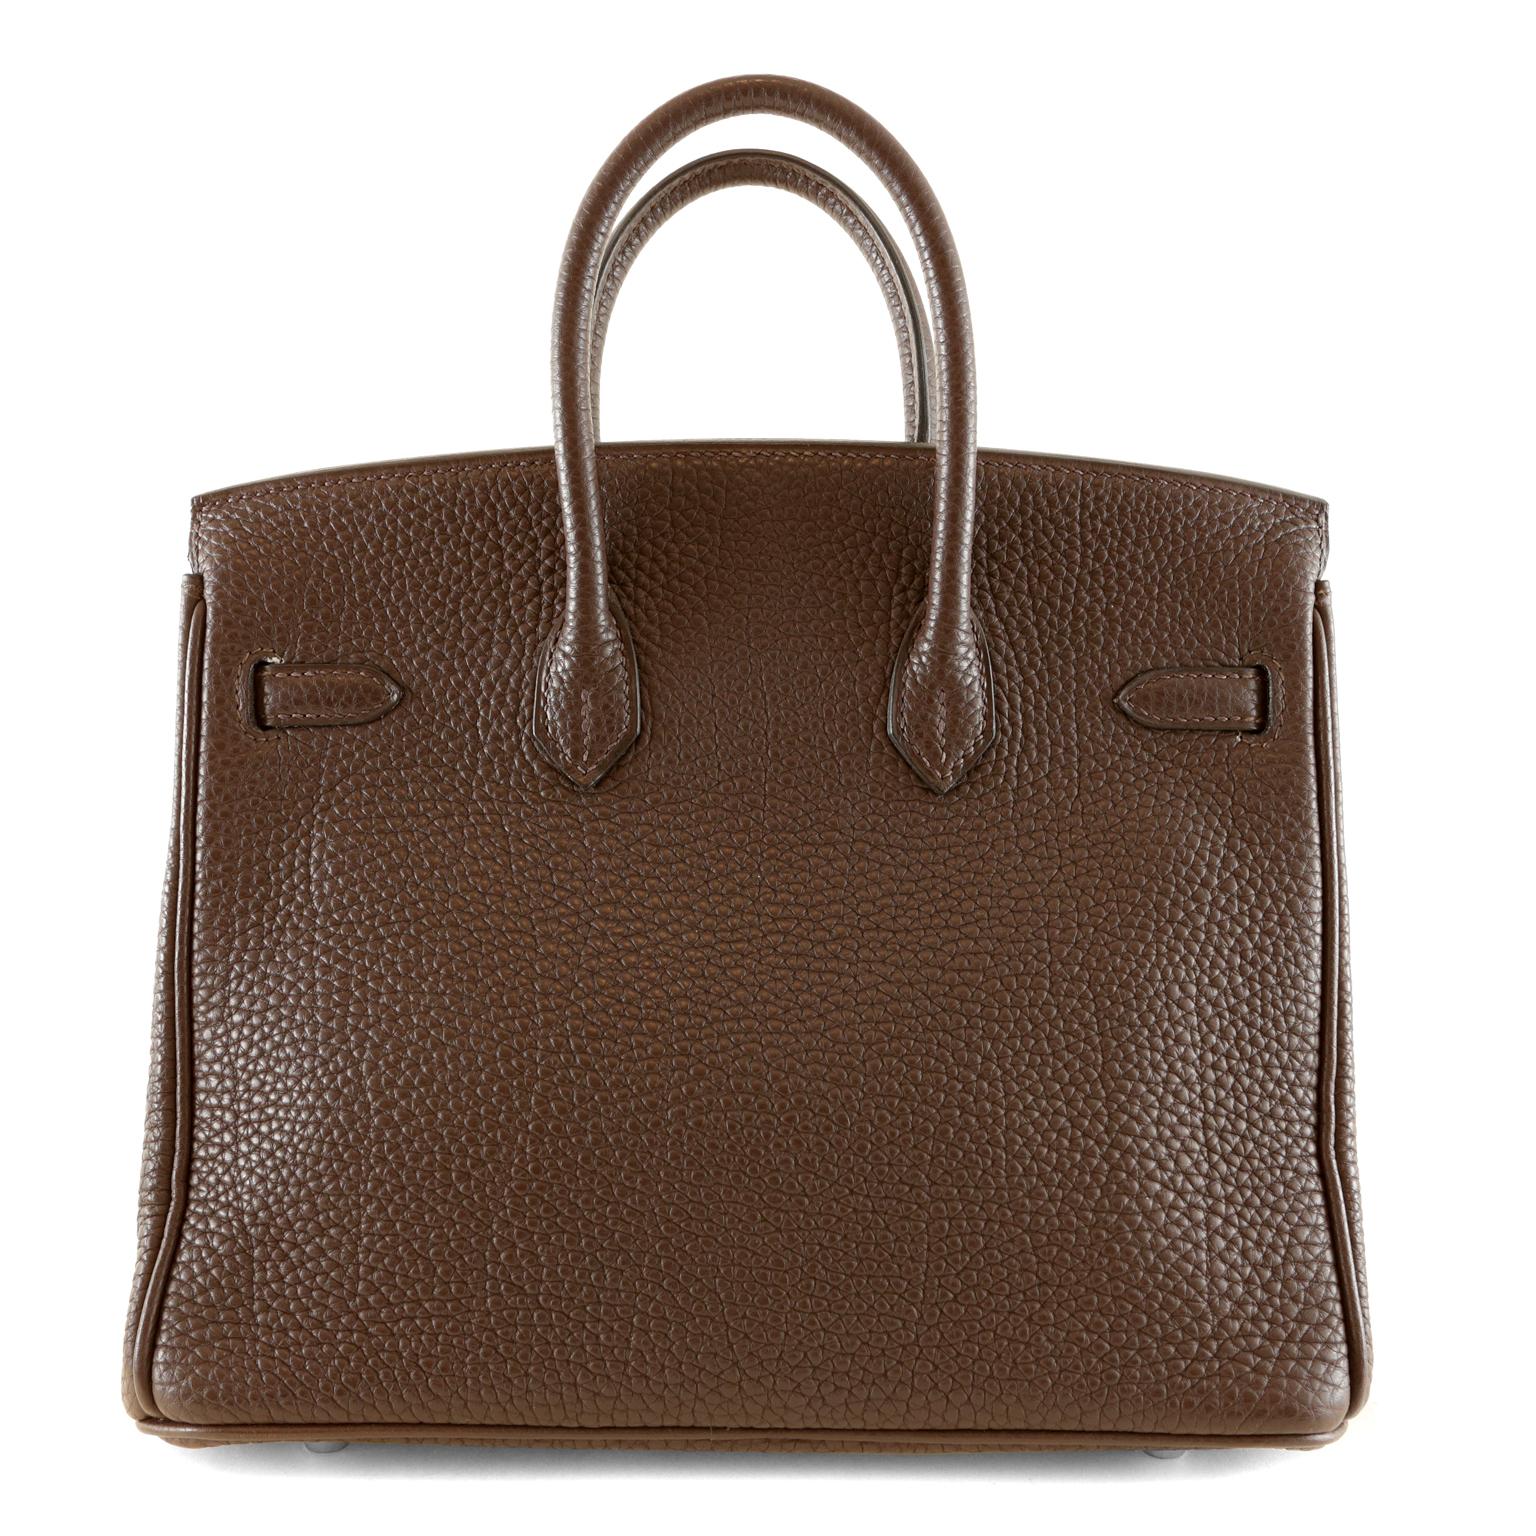 Hermès Cocoan Togo 25 cm Birkin- Excellent Plus Condition
Hand stitched by skilled craftsmen, wait lists of a year or more are not uncommon for the Hermès Birkin. They are considered the ultimate in luxury fashion.  Cocoan, a deep chocolate brown,